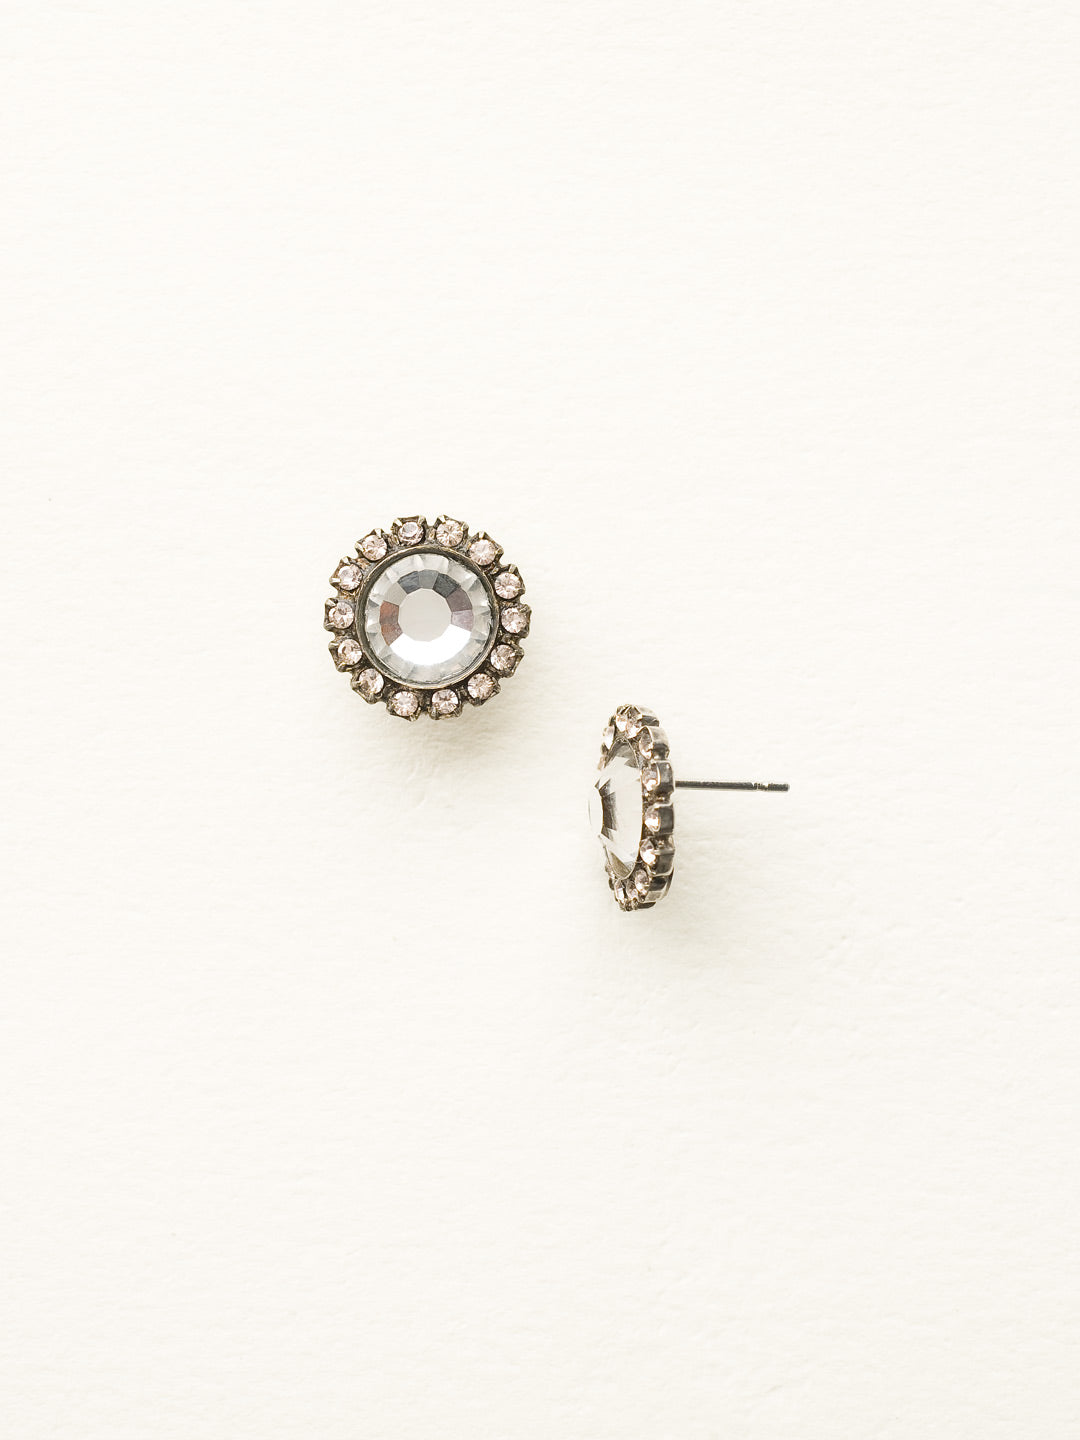 Circular Stud Earring with Rhinestone Edging - ECE20ASSNB - A must-have! A circular stone sits at the center of these post backed earrings outlined by a circular crystal border. Truly a staple to any woman's wardrobe.